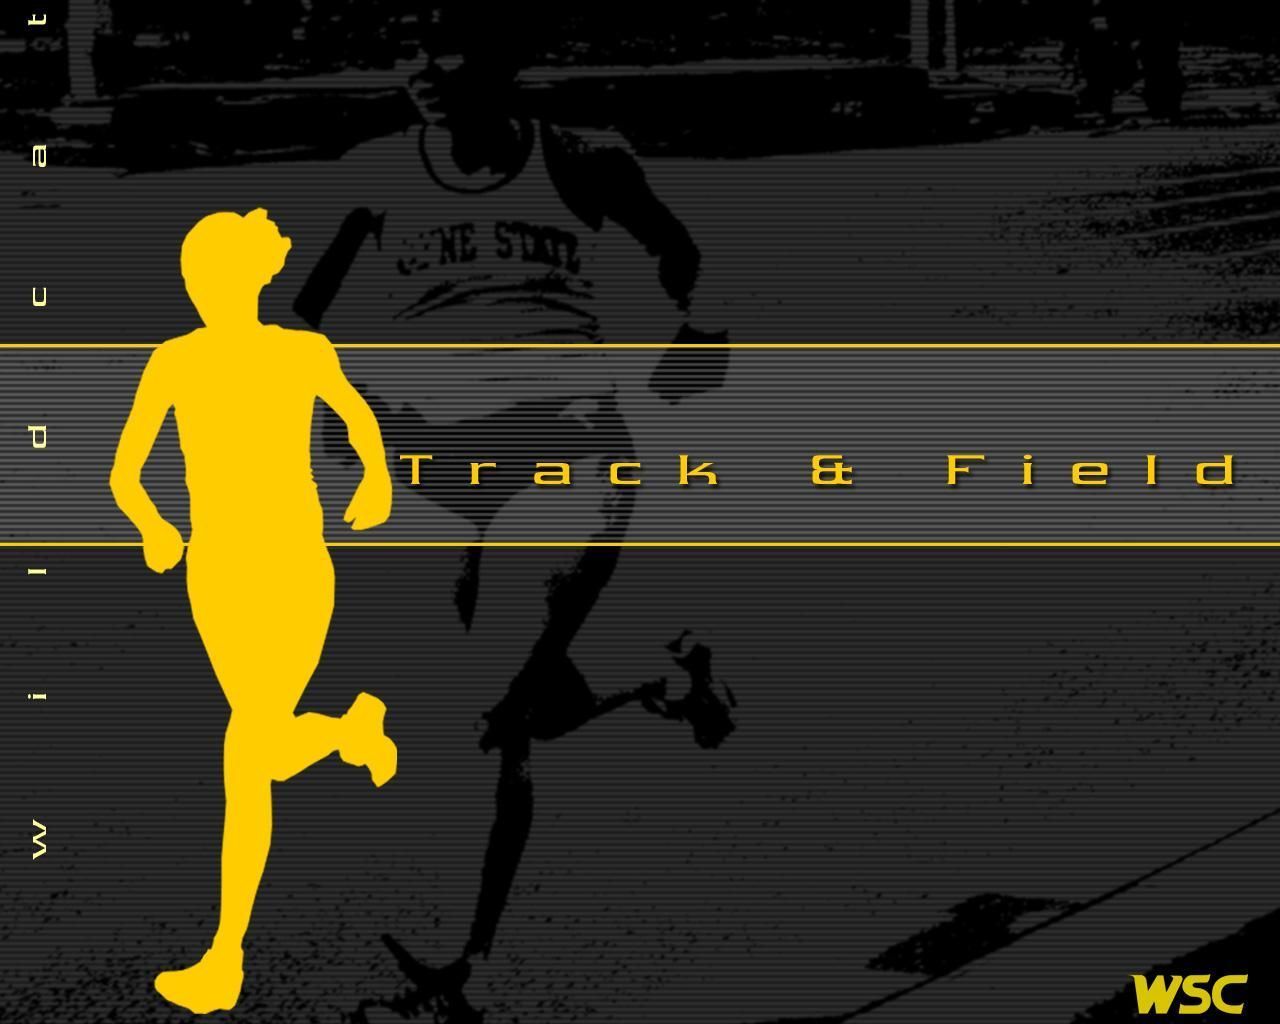 Track And Field Wallpapers Wallpaper 1 13 Of 13 HD Wallpapers Range